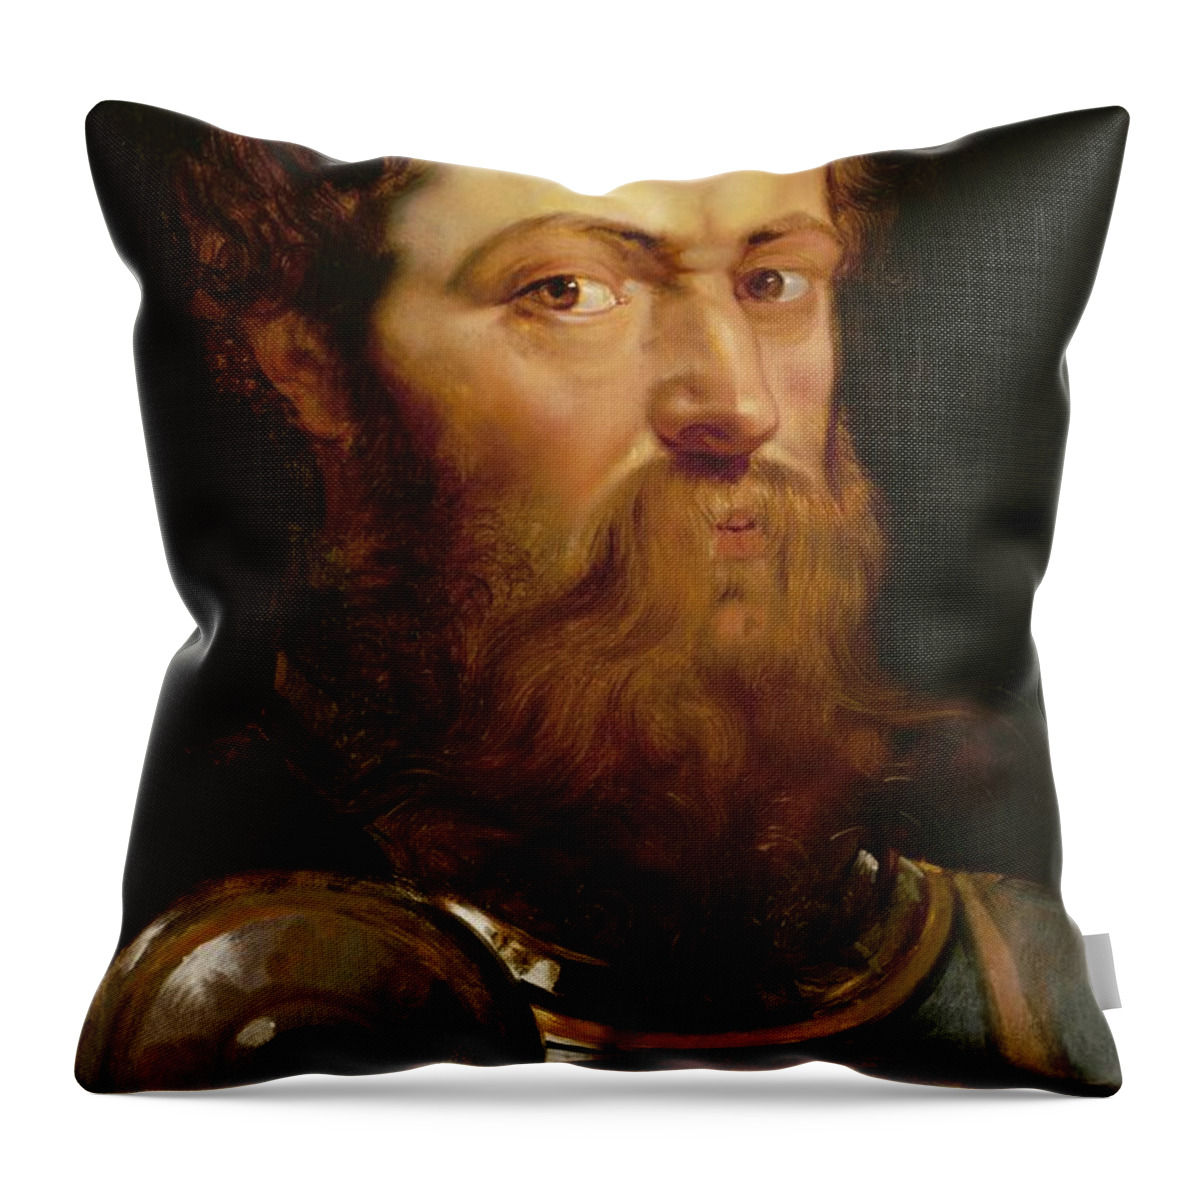 The Throw Pillow featuring the painting The Commander's Head by Peter Paul Rubens